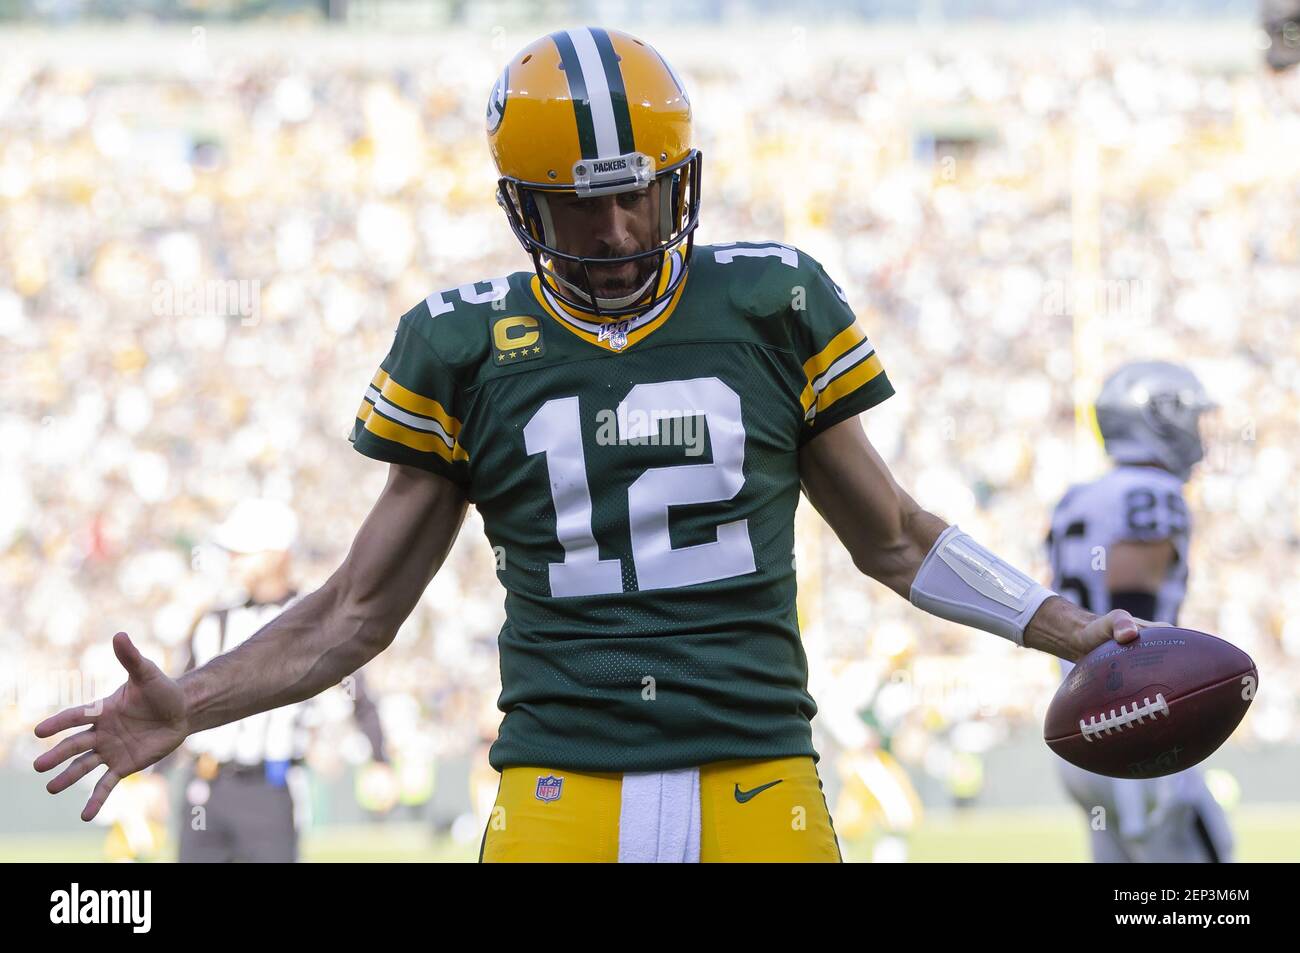 October 20, 2019: Green Bay Packers quarterback Aaron Rodgers #12 does his  ''belt'' celebration after a touchdown during the NFL Football game between  the Oakland Raiders and the Green Bay Packers at